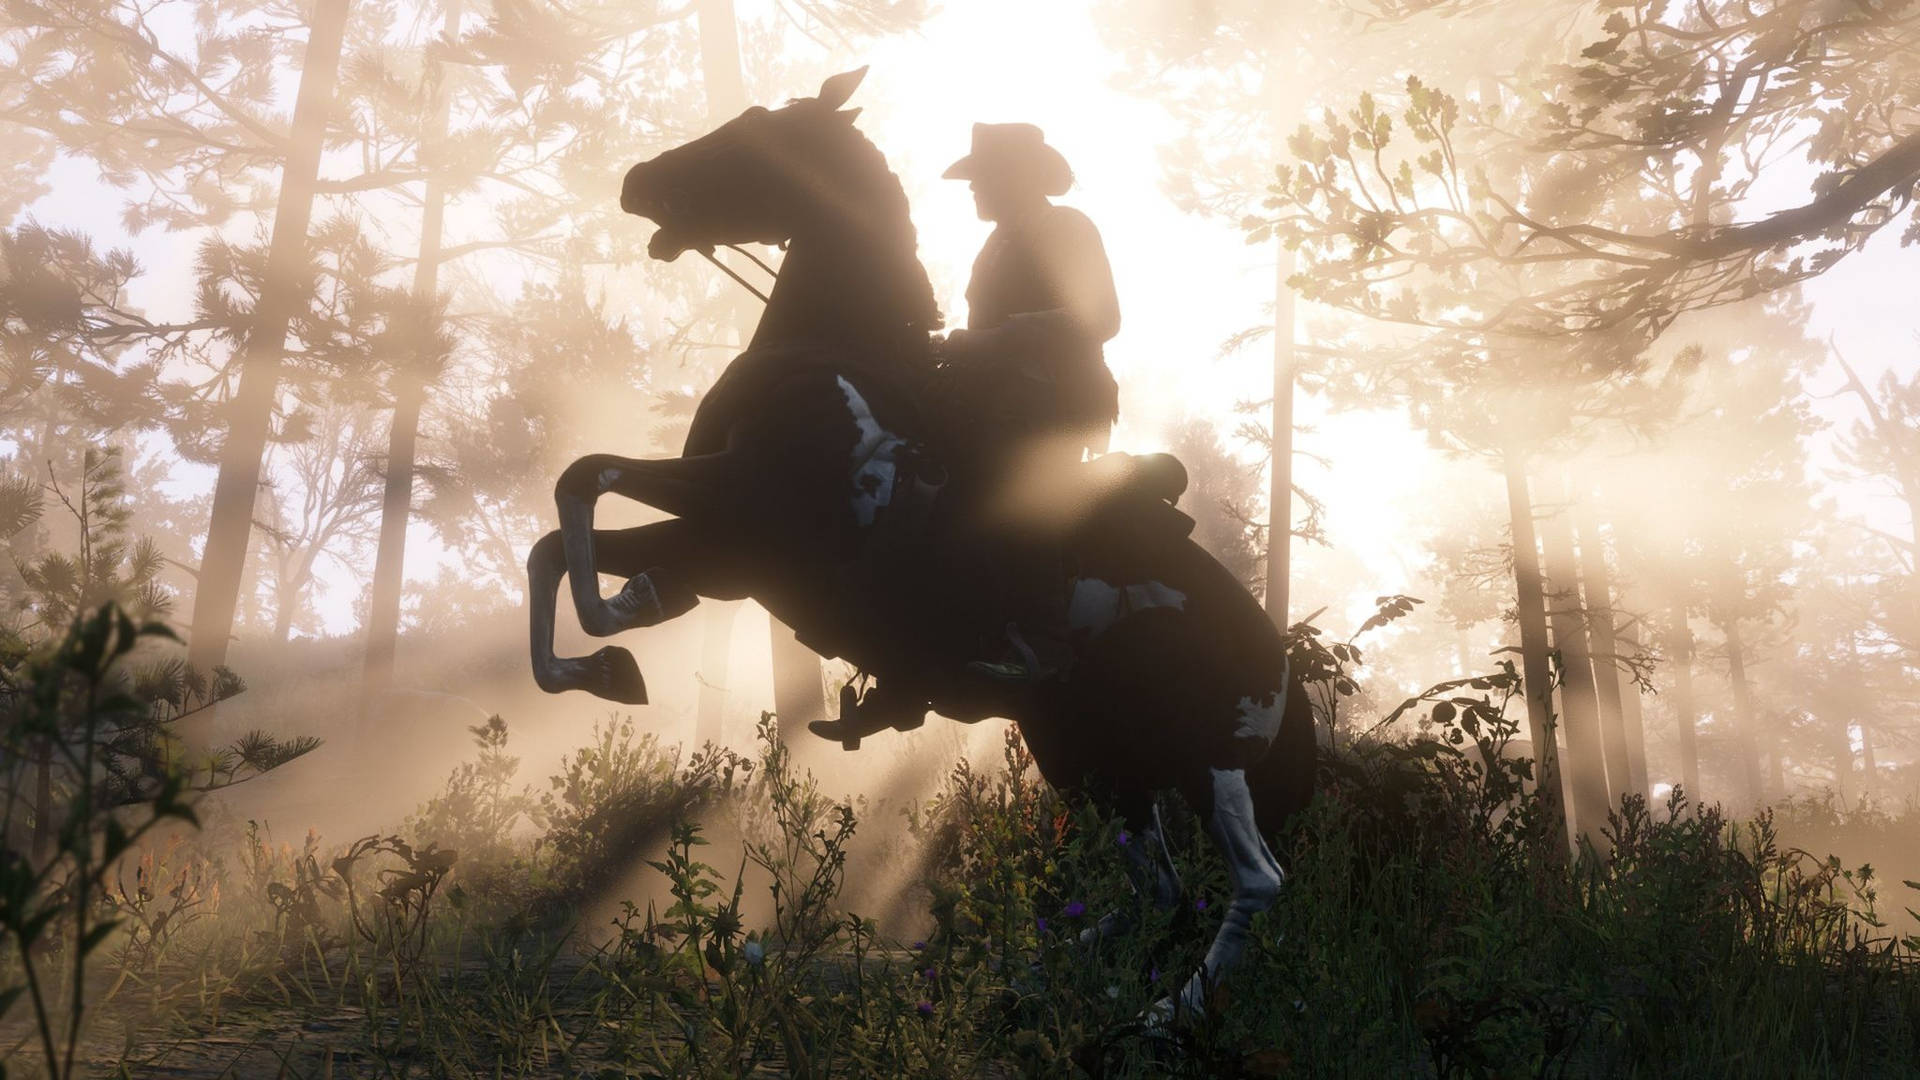 A Man Riding A Horse In The Woods Background